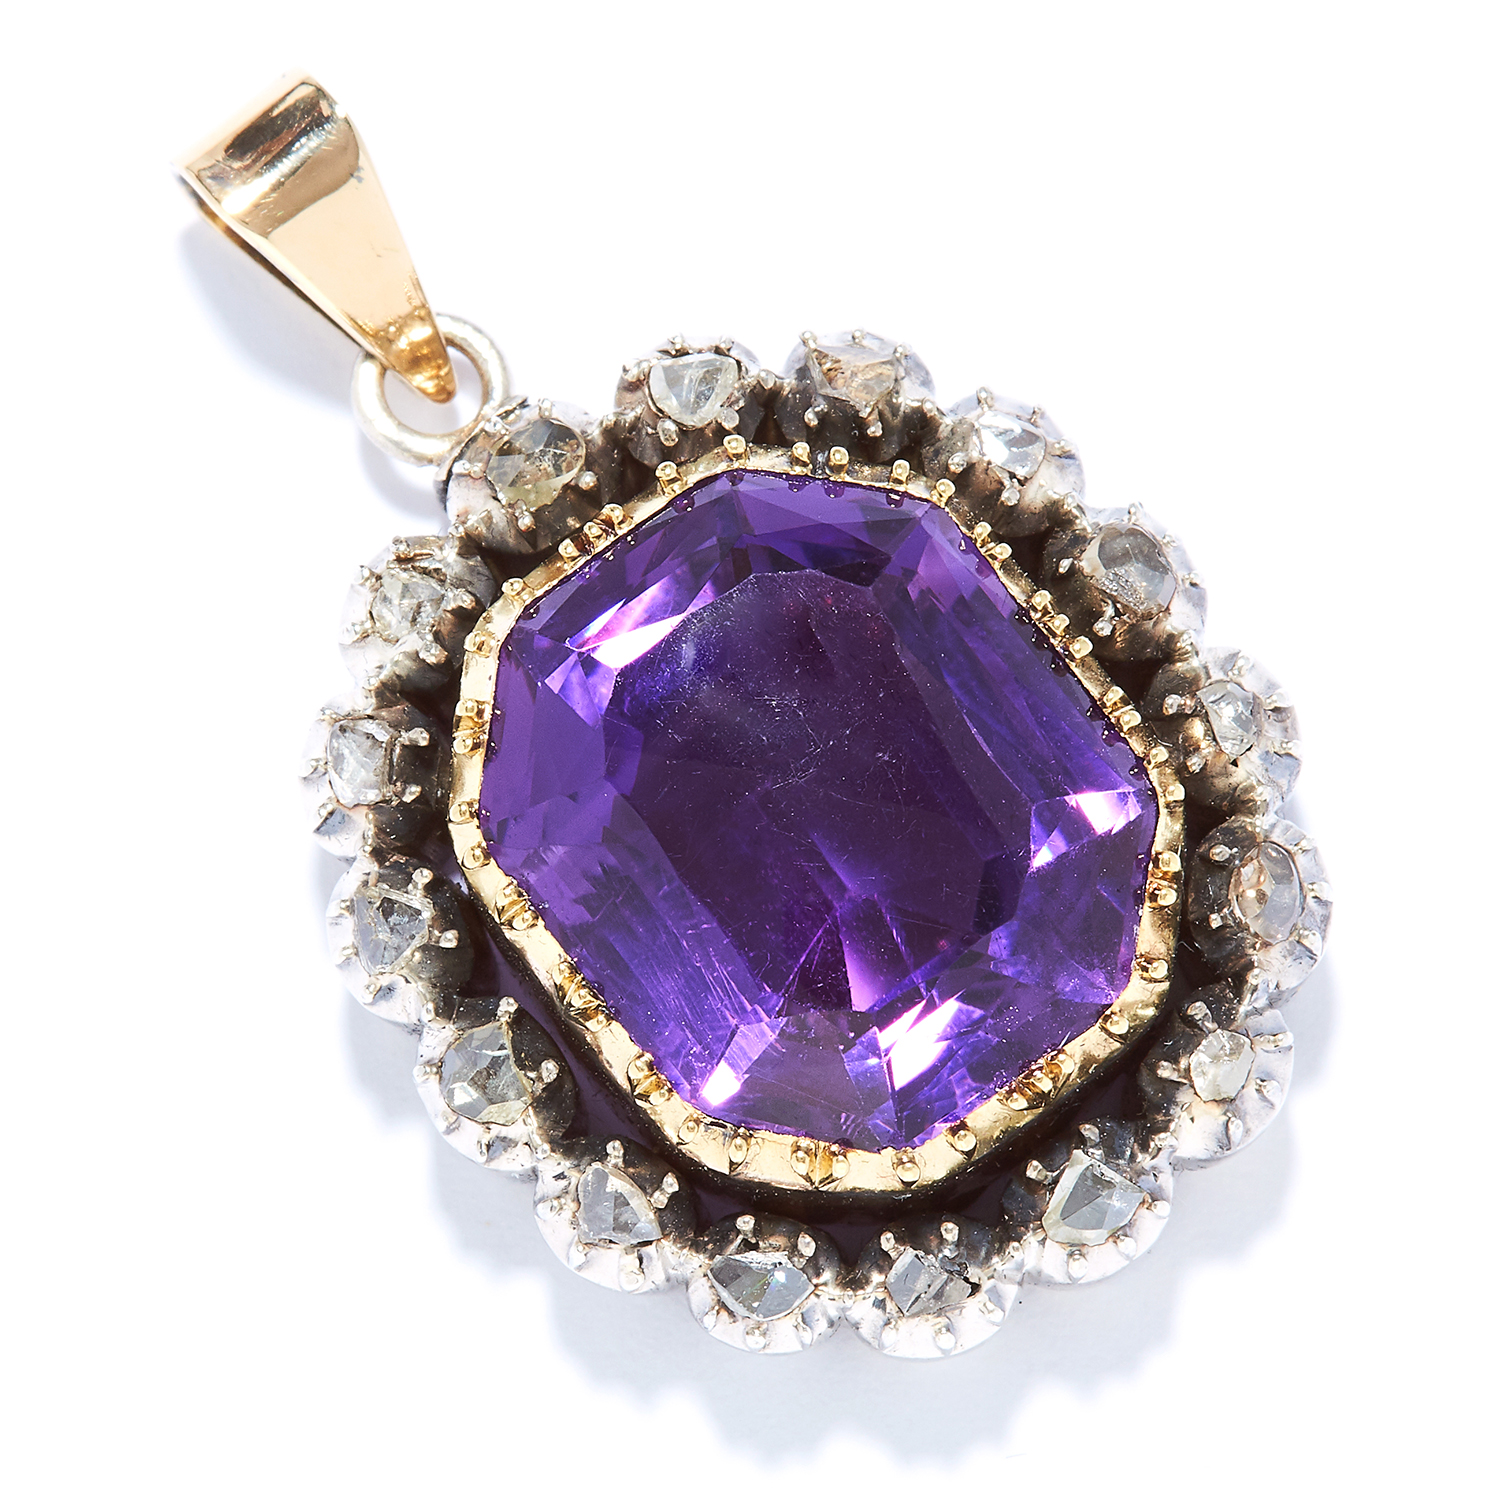 ANTIQUE AMETHYST AND DIAMOND PENDANT in gold, set with an emerald cut amethyst and rose cut